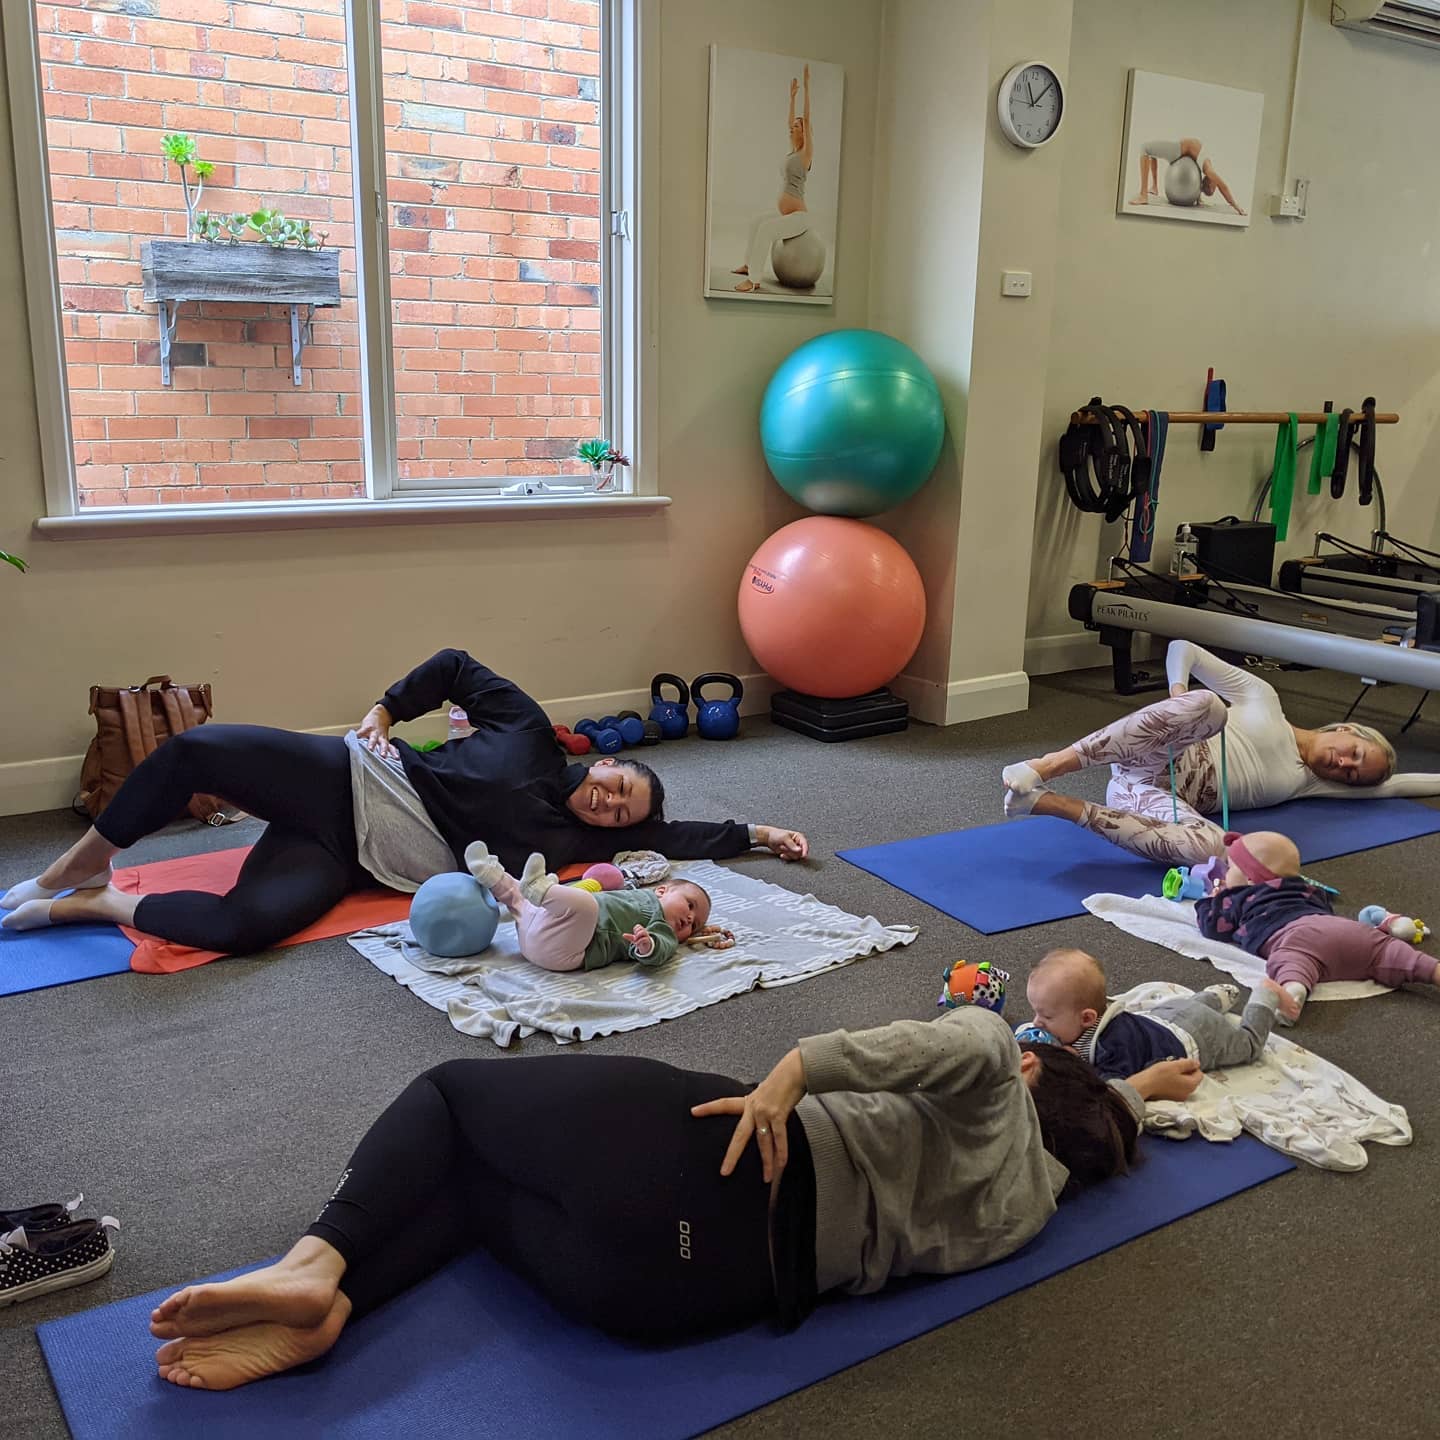 Great work ladies and babies at our Mums and Bubs session this morning!Don't forget on Monday 24th May at 1:30pm we will be doing a free Facebook Live Mums and Bubs Pilates Class.So for those of you who could not make it, or any other new mums who are wanting to do some gentle exercise join us this Monday via Facebook Live.